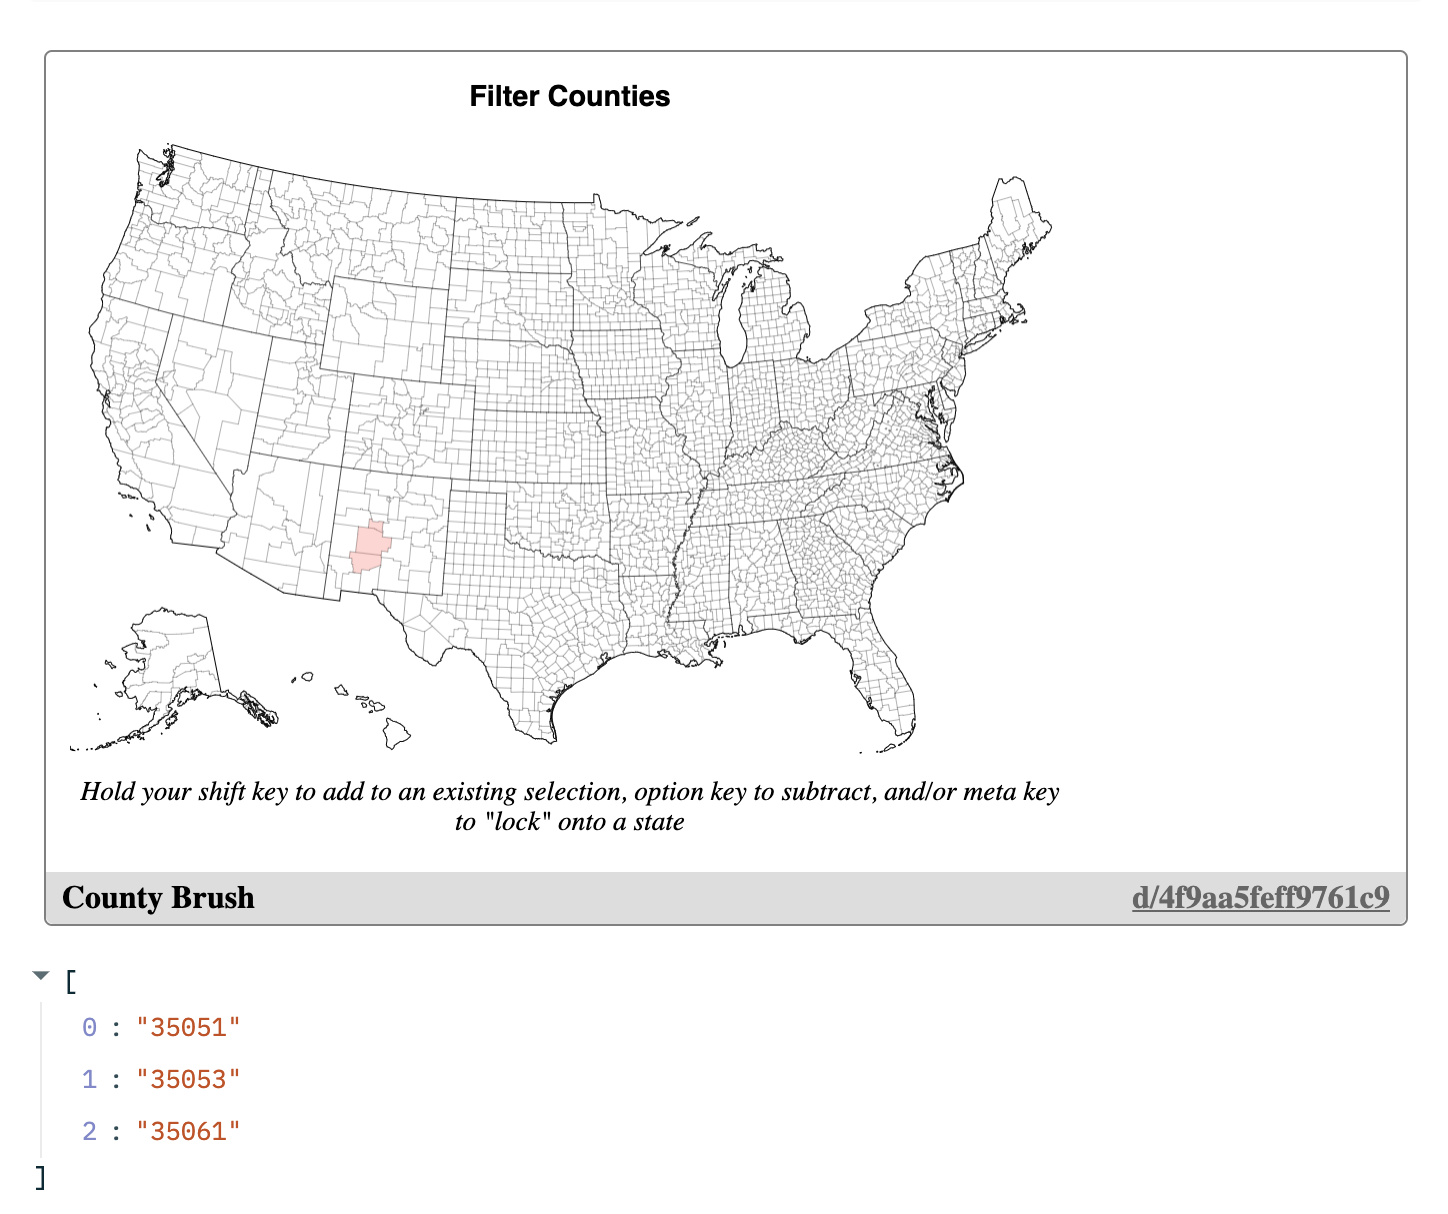 Rendered output of the code above, showing a map of the United States that can be brushed to select specific counties.